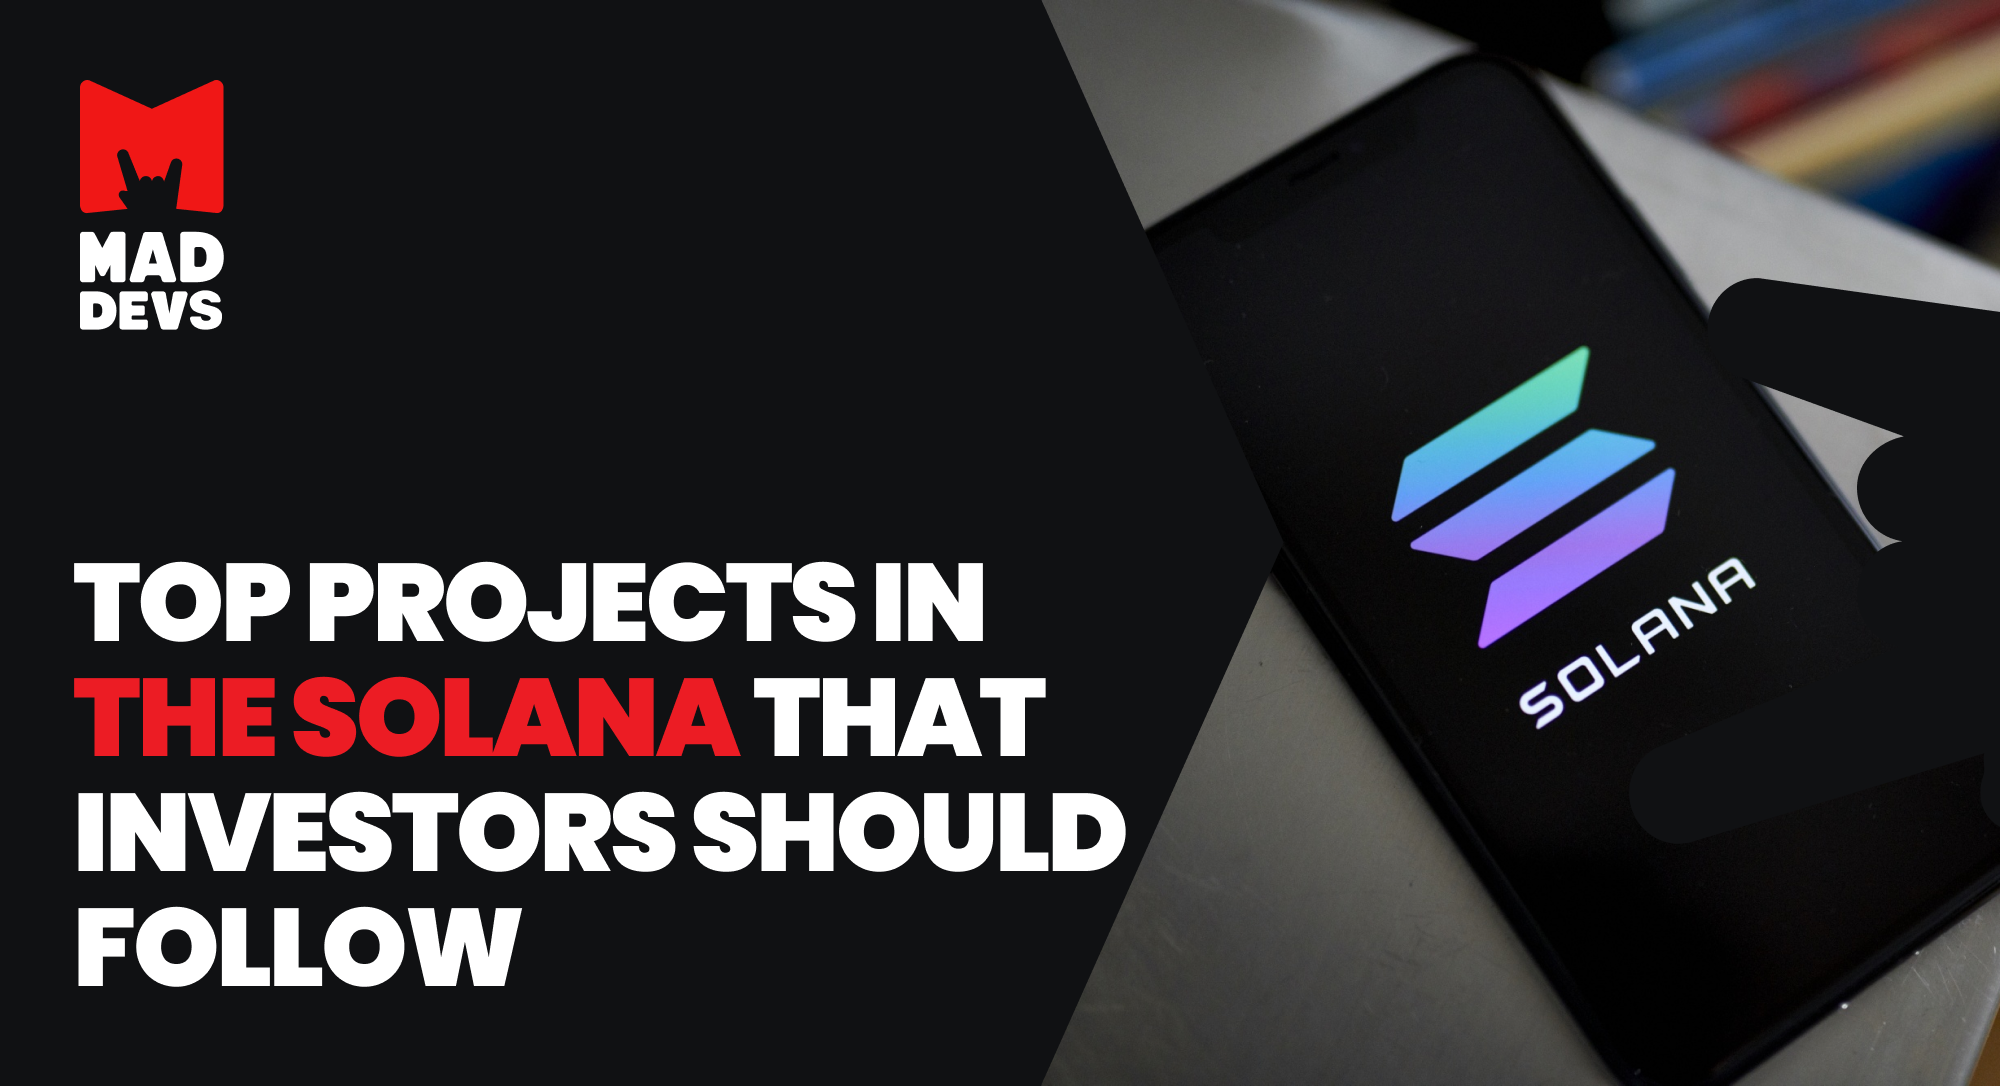 Top Projects In The Solana Ecosystem That Investors Should Follow